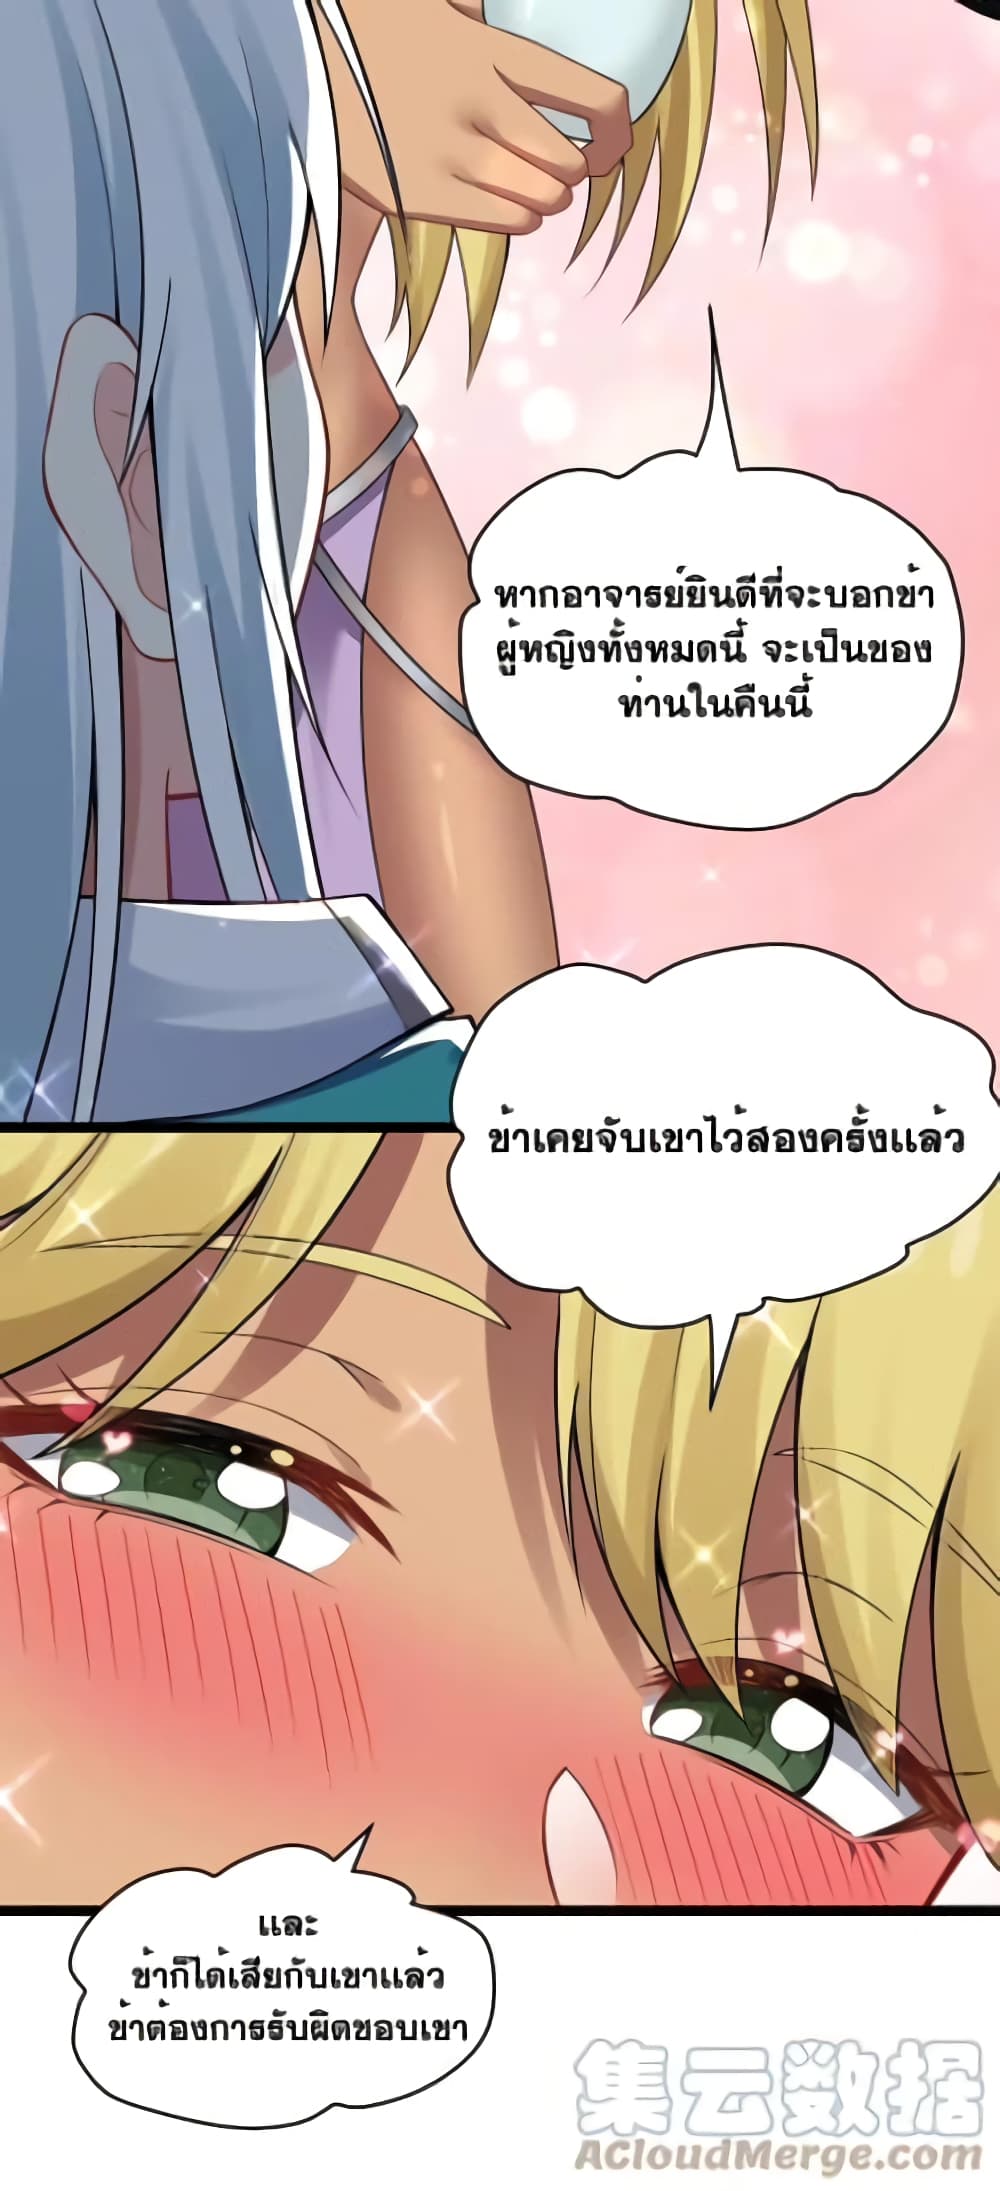 Godsian Masian from Another World ตอนที่ 105 (4)